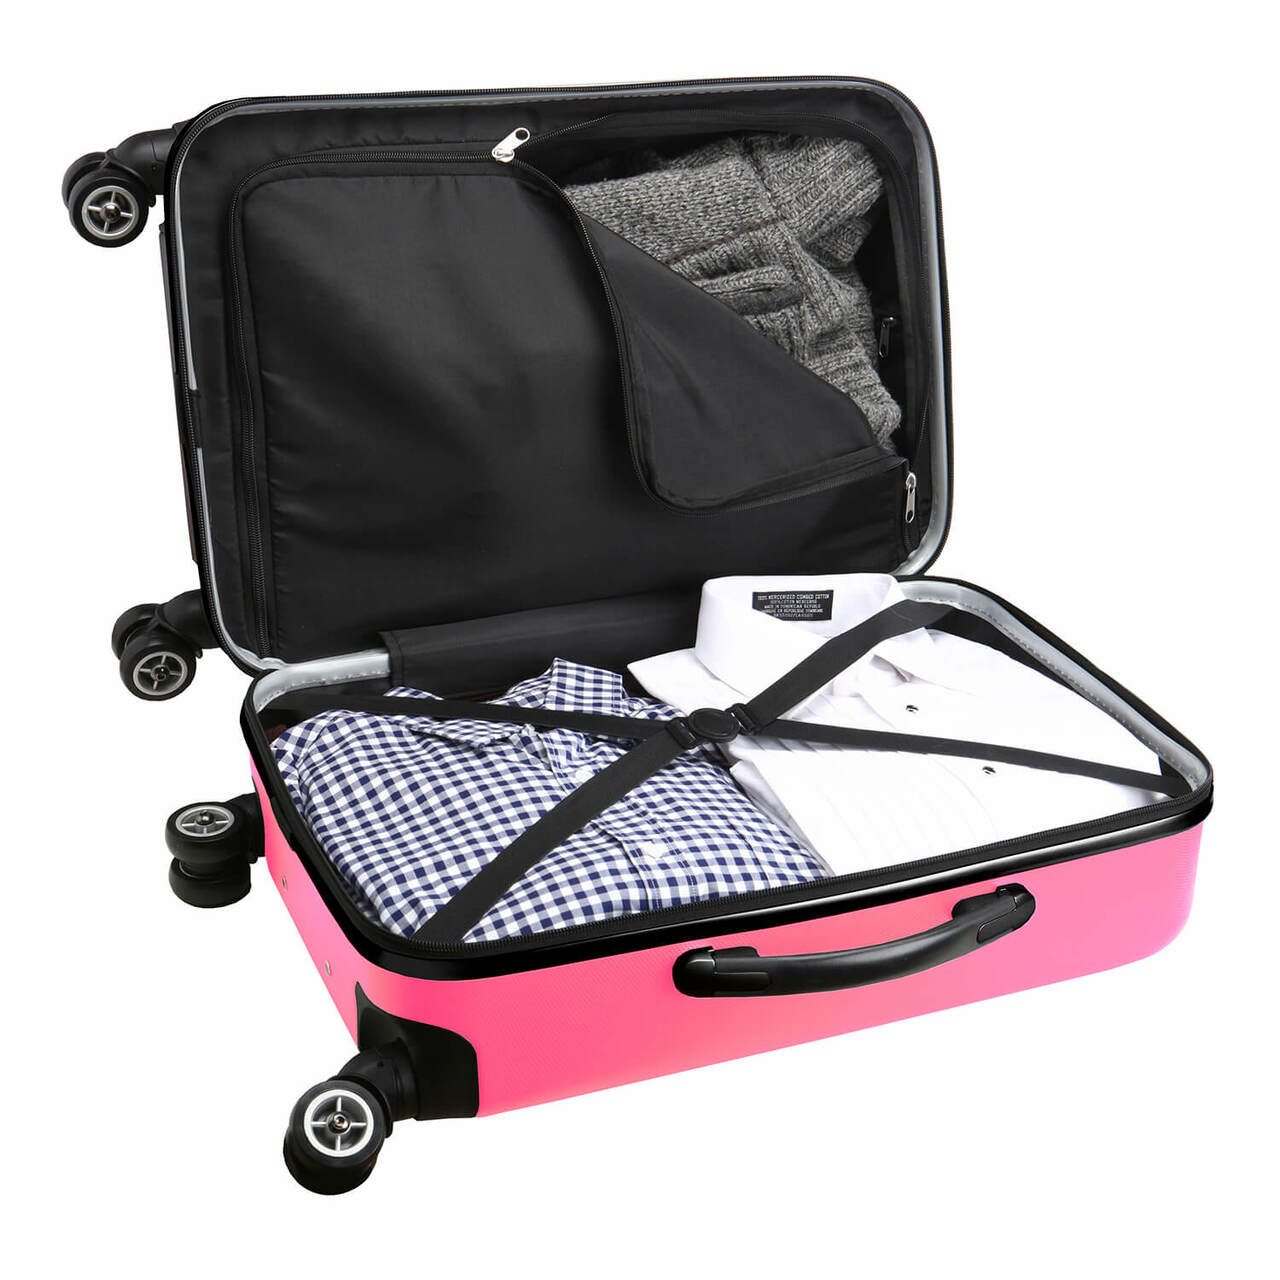 Texas Tech Red Raiders 20" Pink Domestic Carry-on Spinner